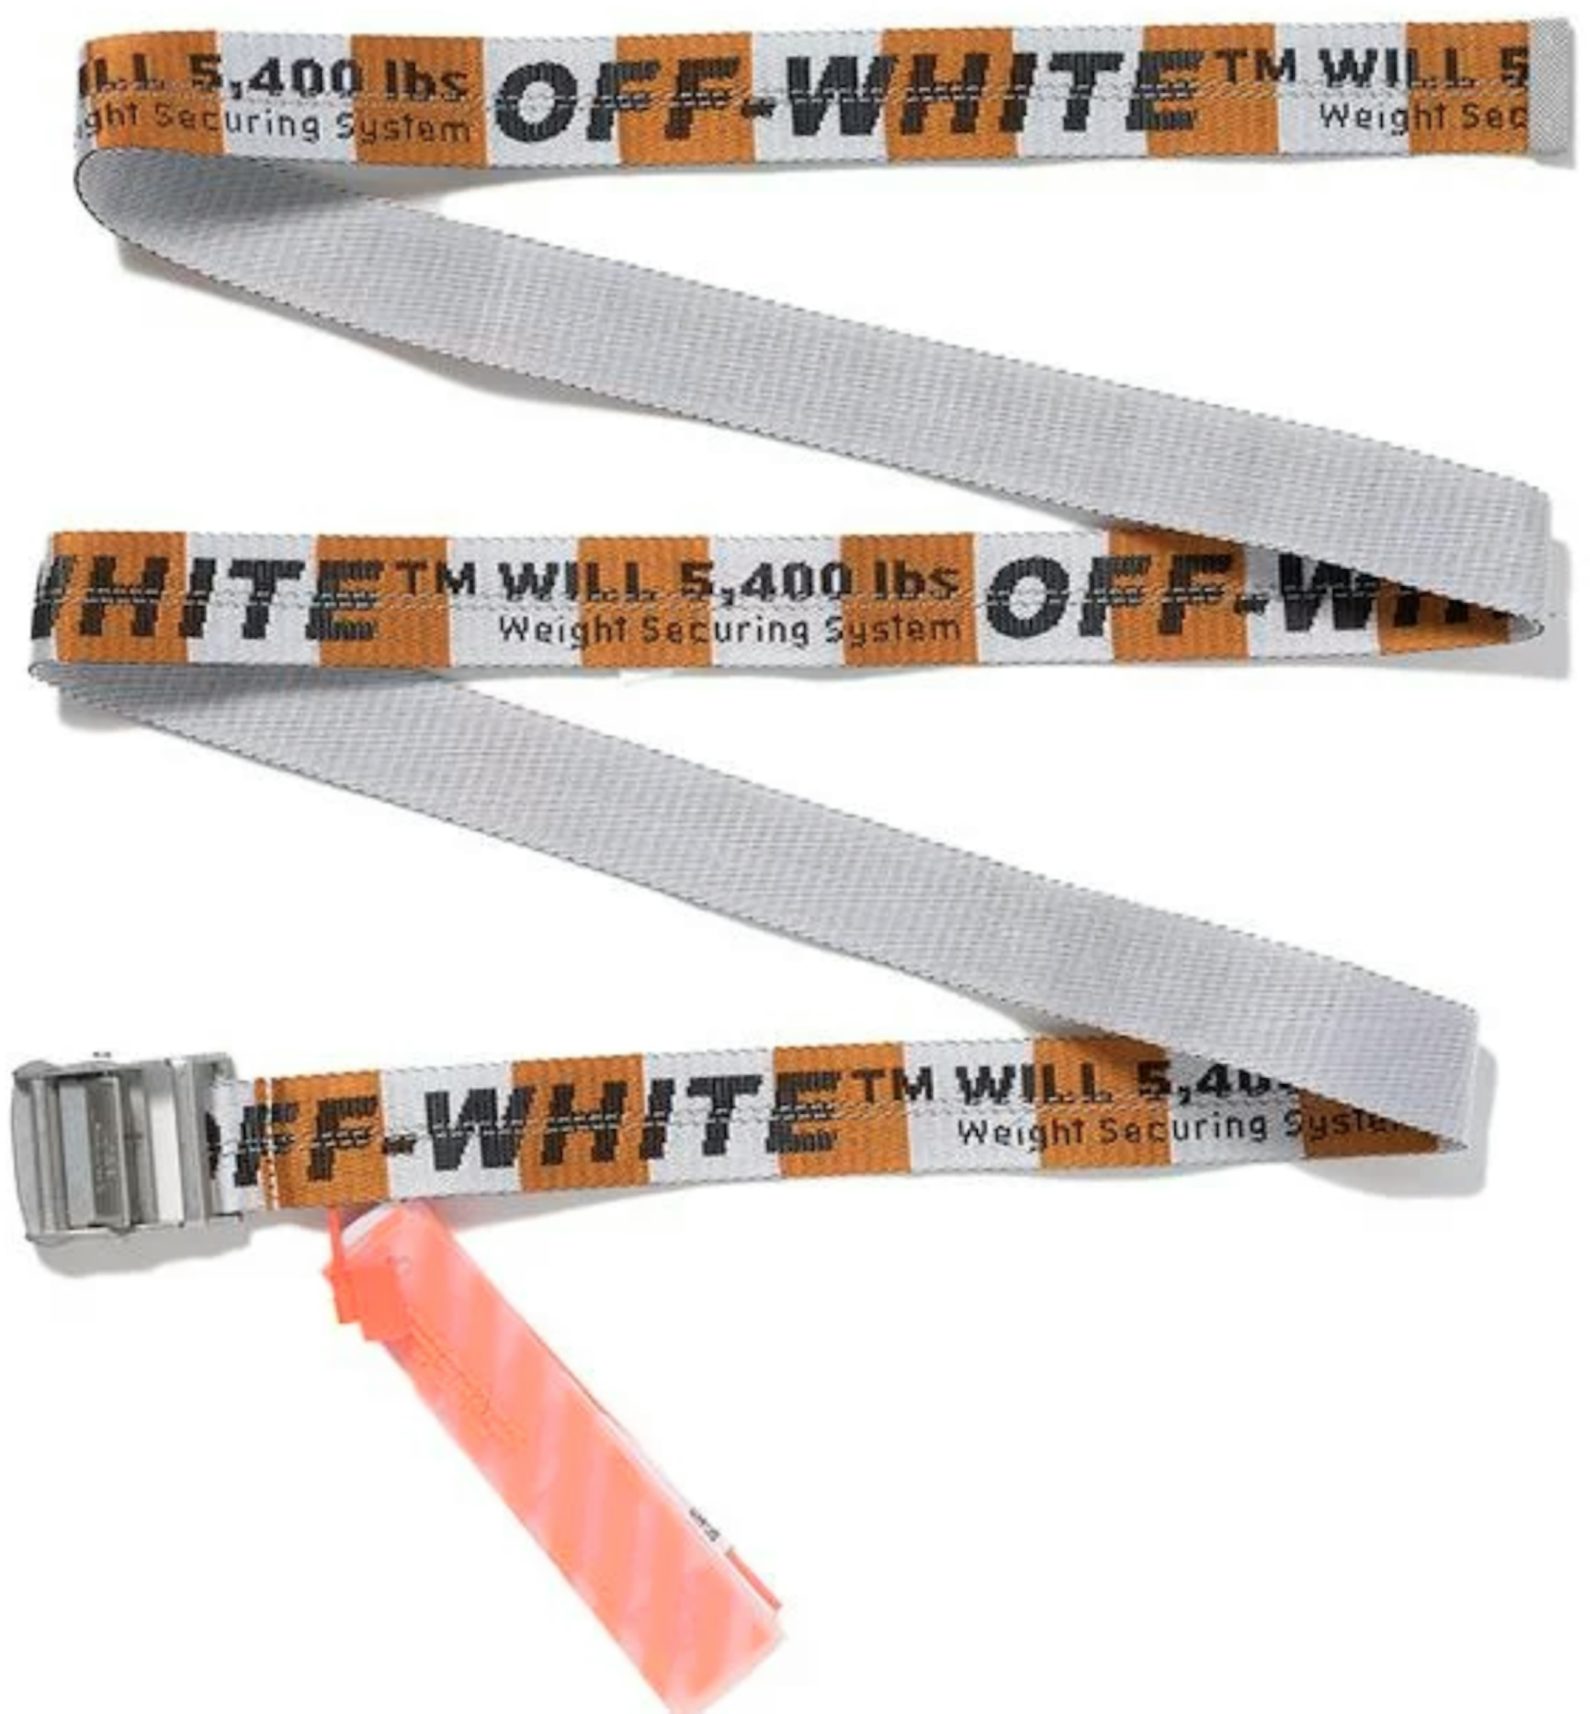 Off-White Checket Box Pink Hat Virgil Abloh x MCA Figures of